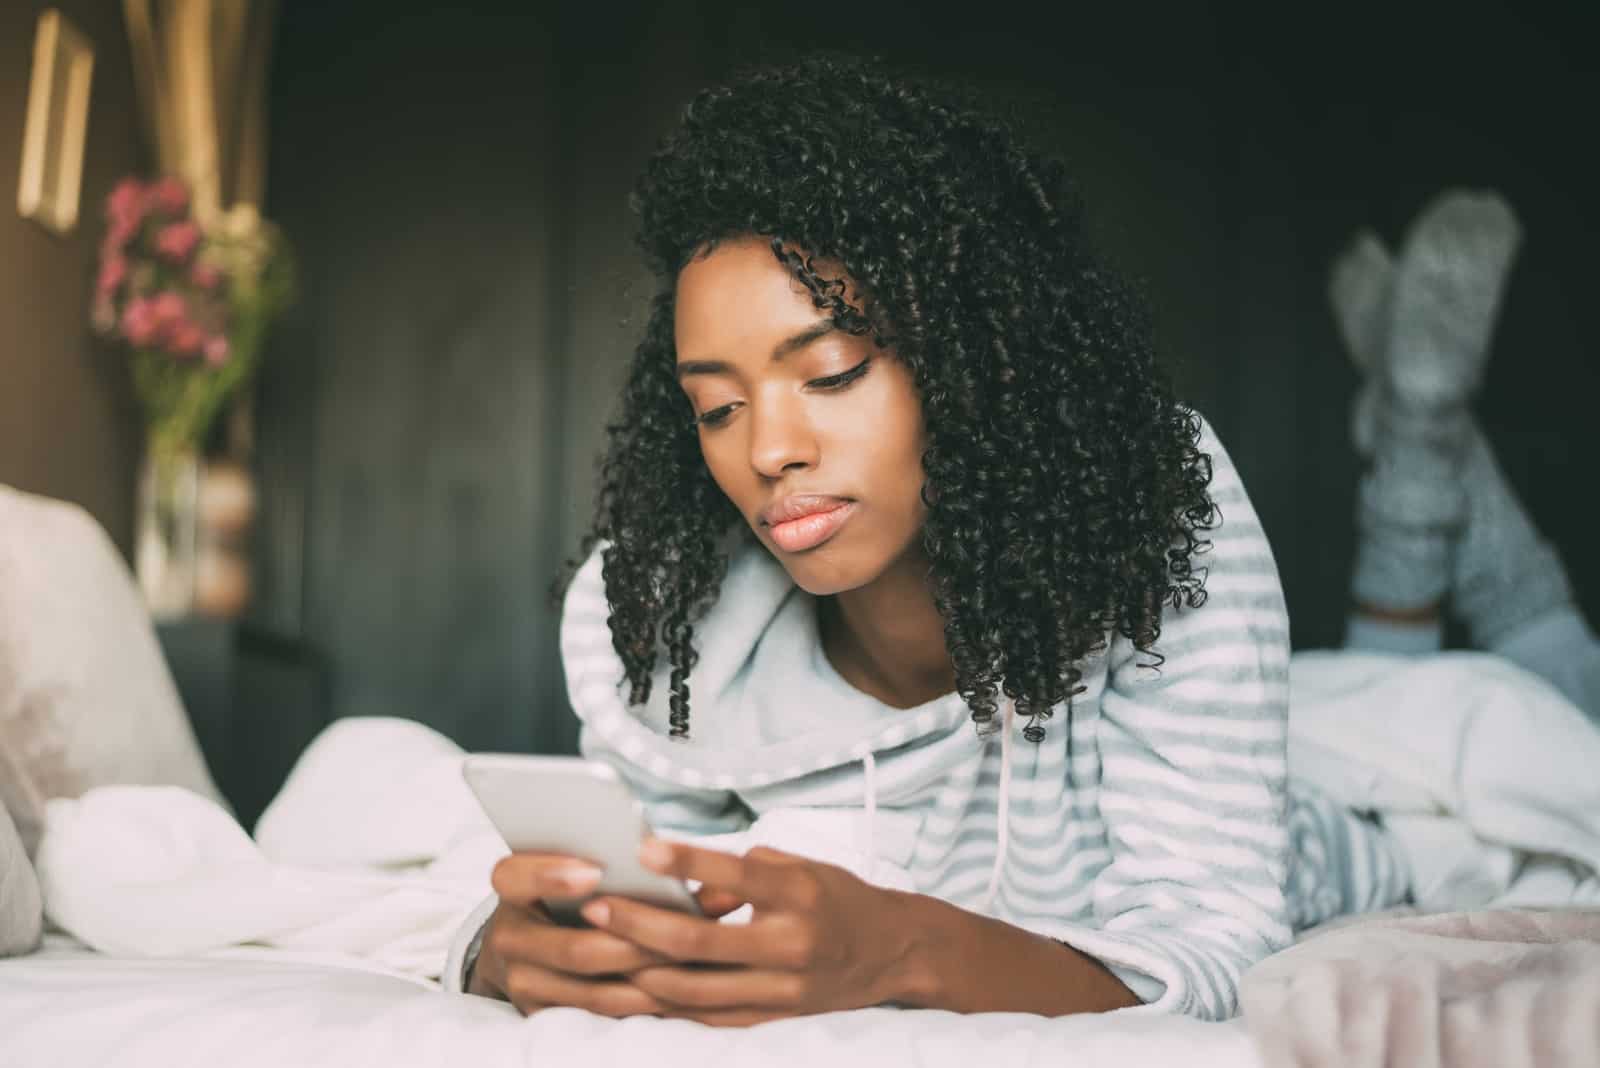 woman with curly hair using smartphone while laying on bed